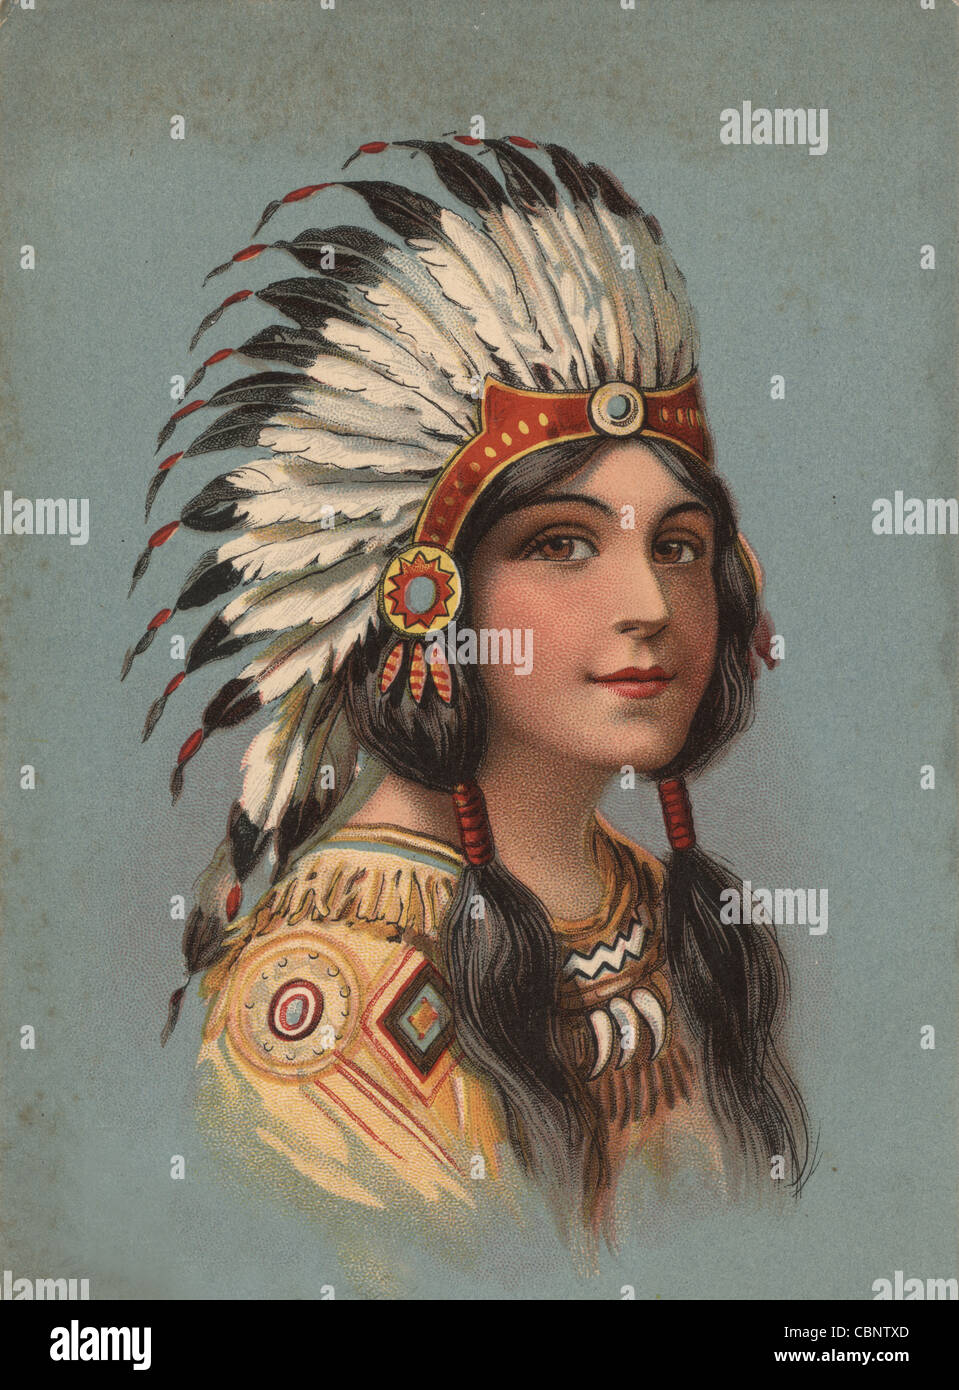 Download American Indian Images Nomer 15